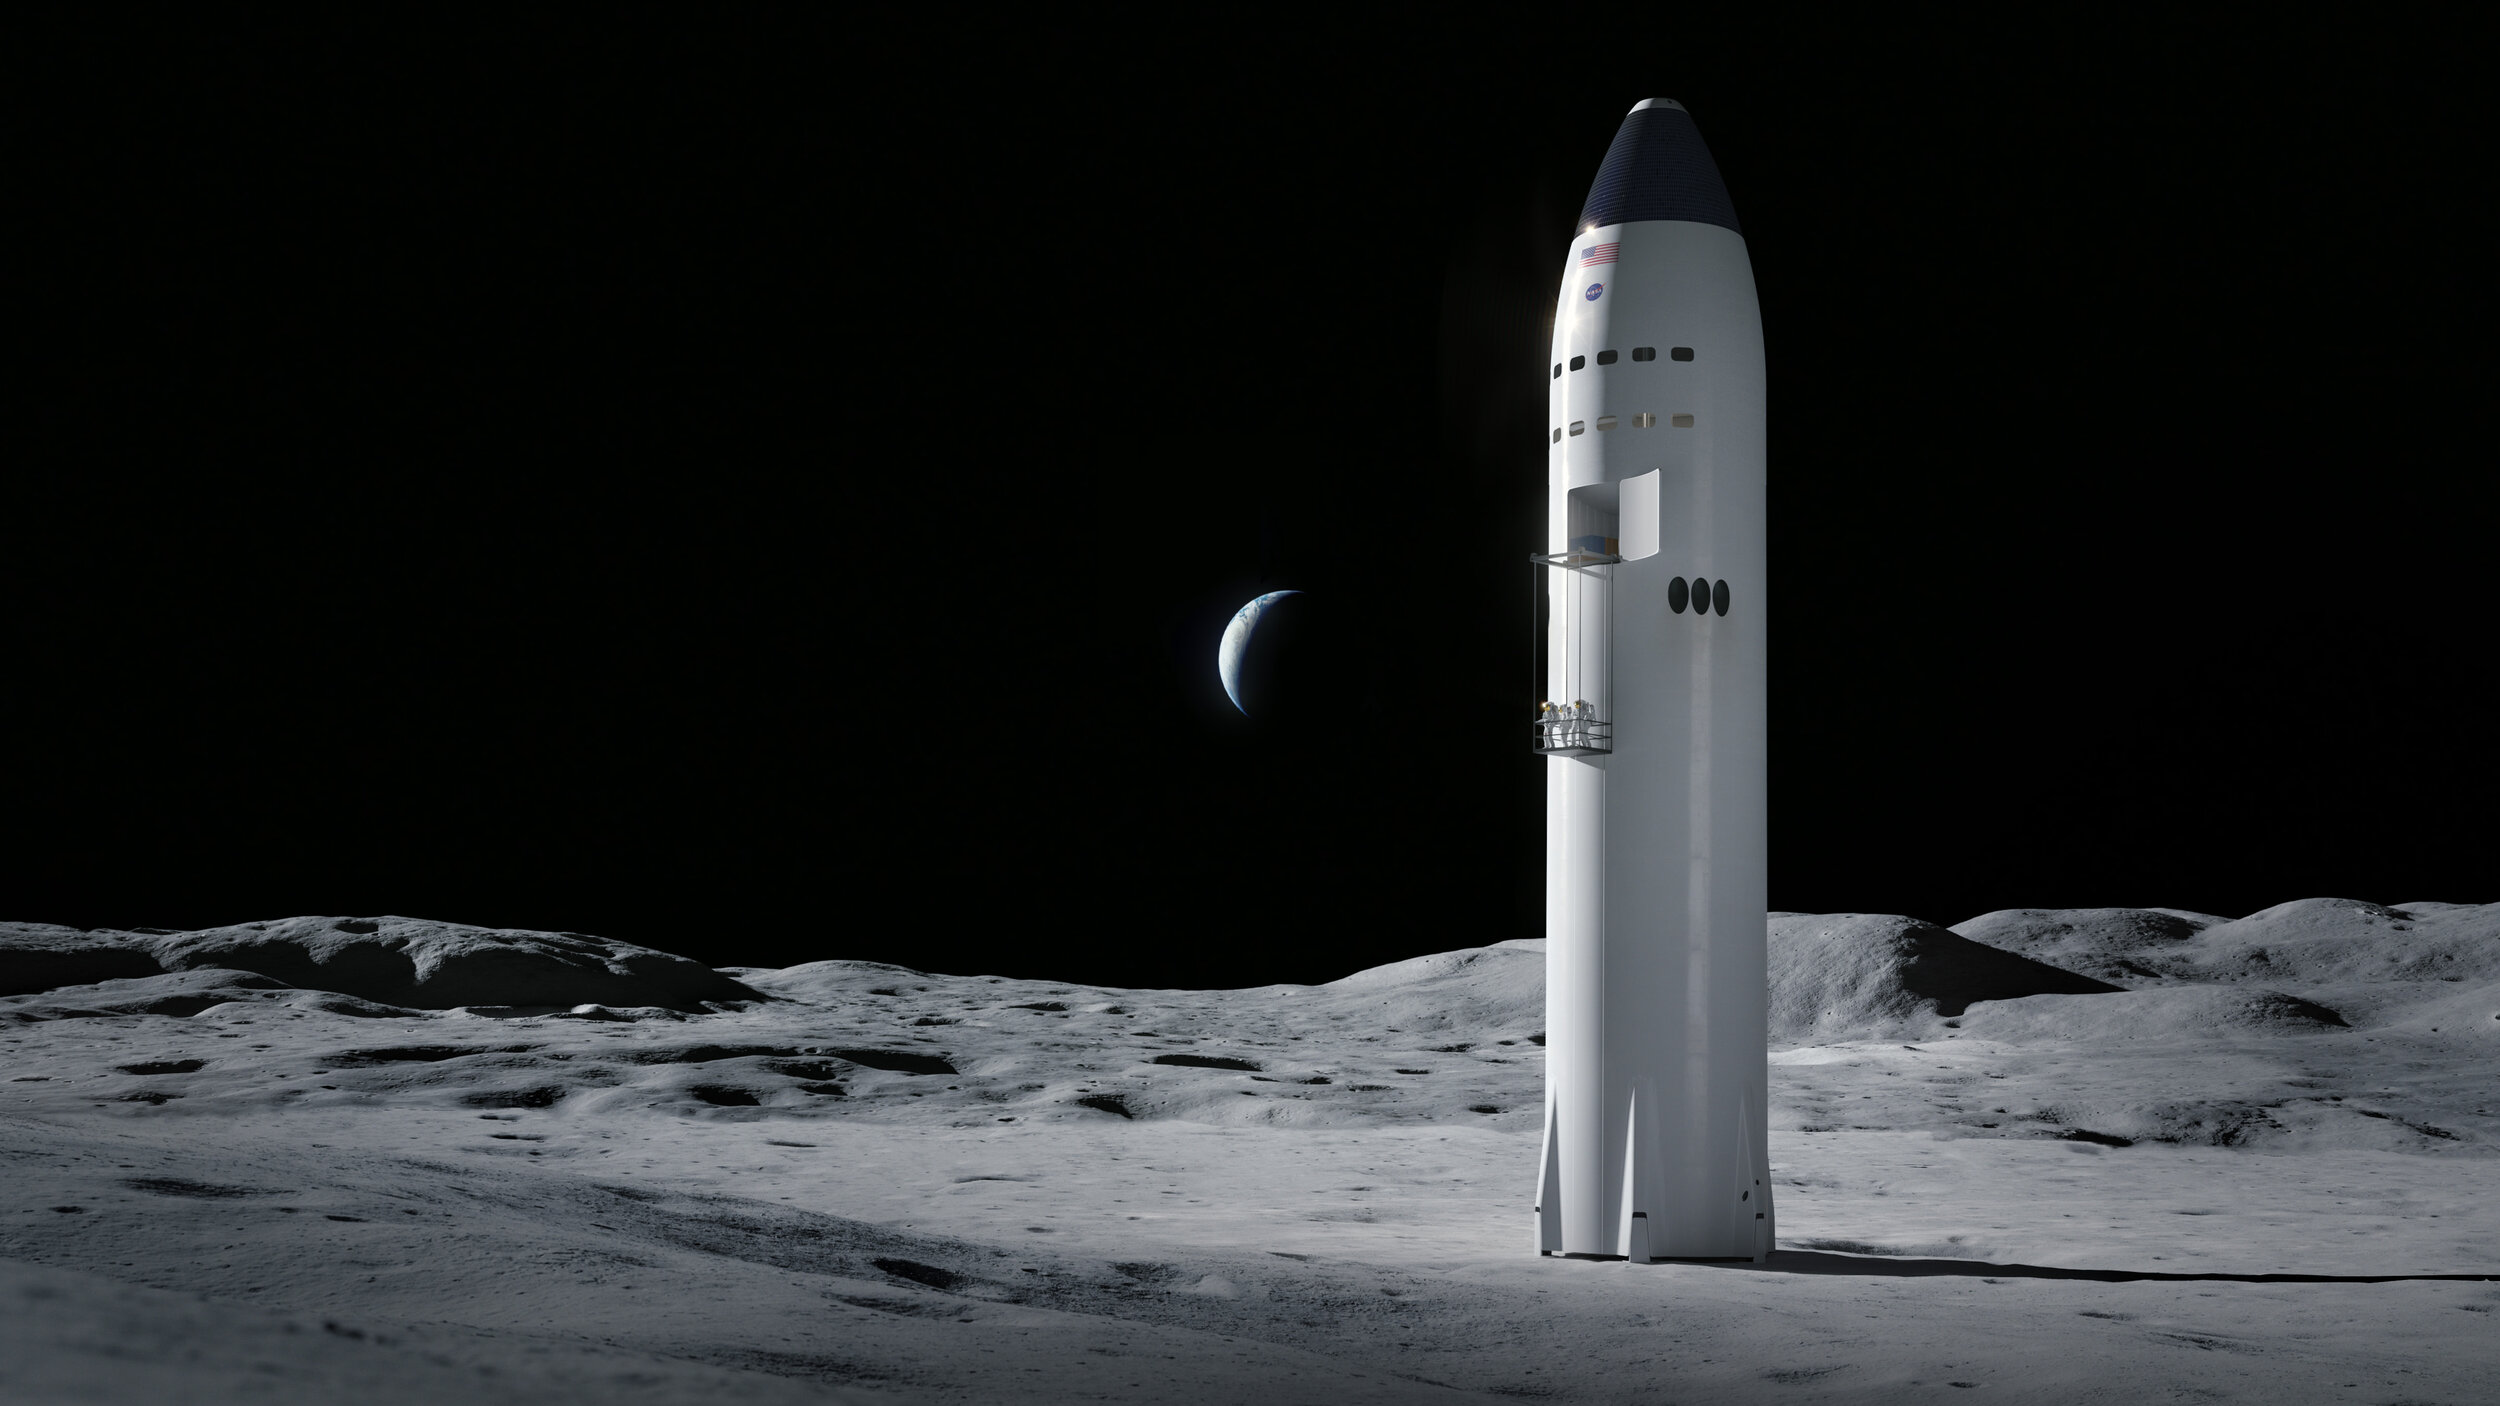  An illustration of SpaceX’s Starship landed on the Moon with astronauts using an elevator to get to the surface. Credit: SpaceX 